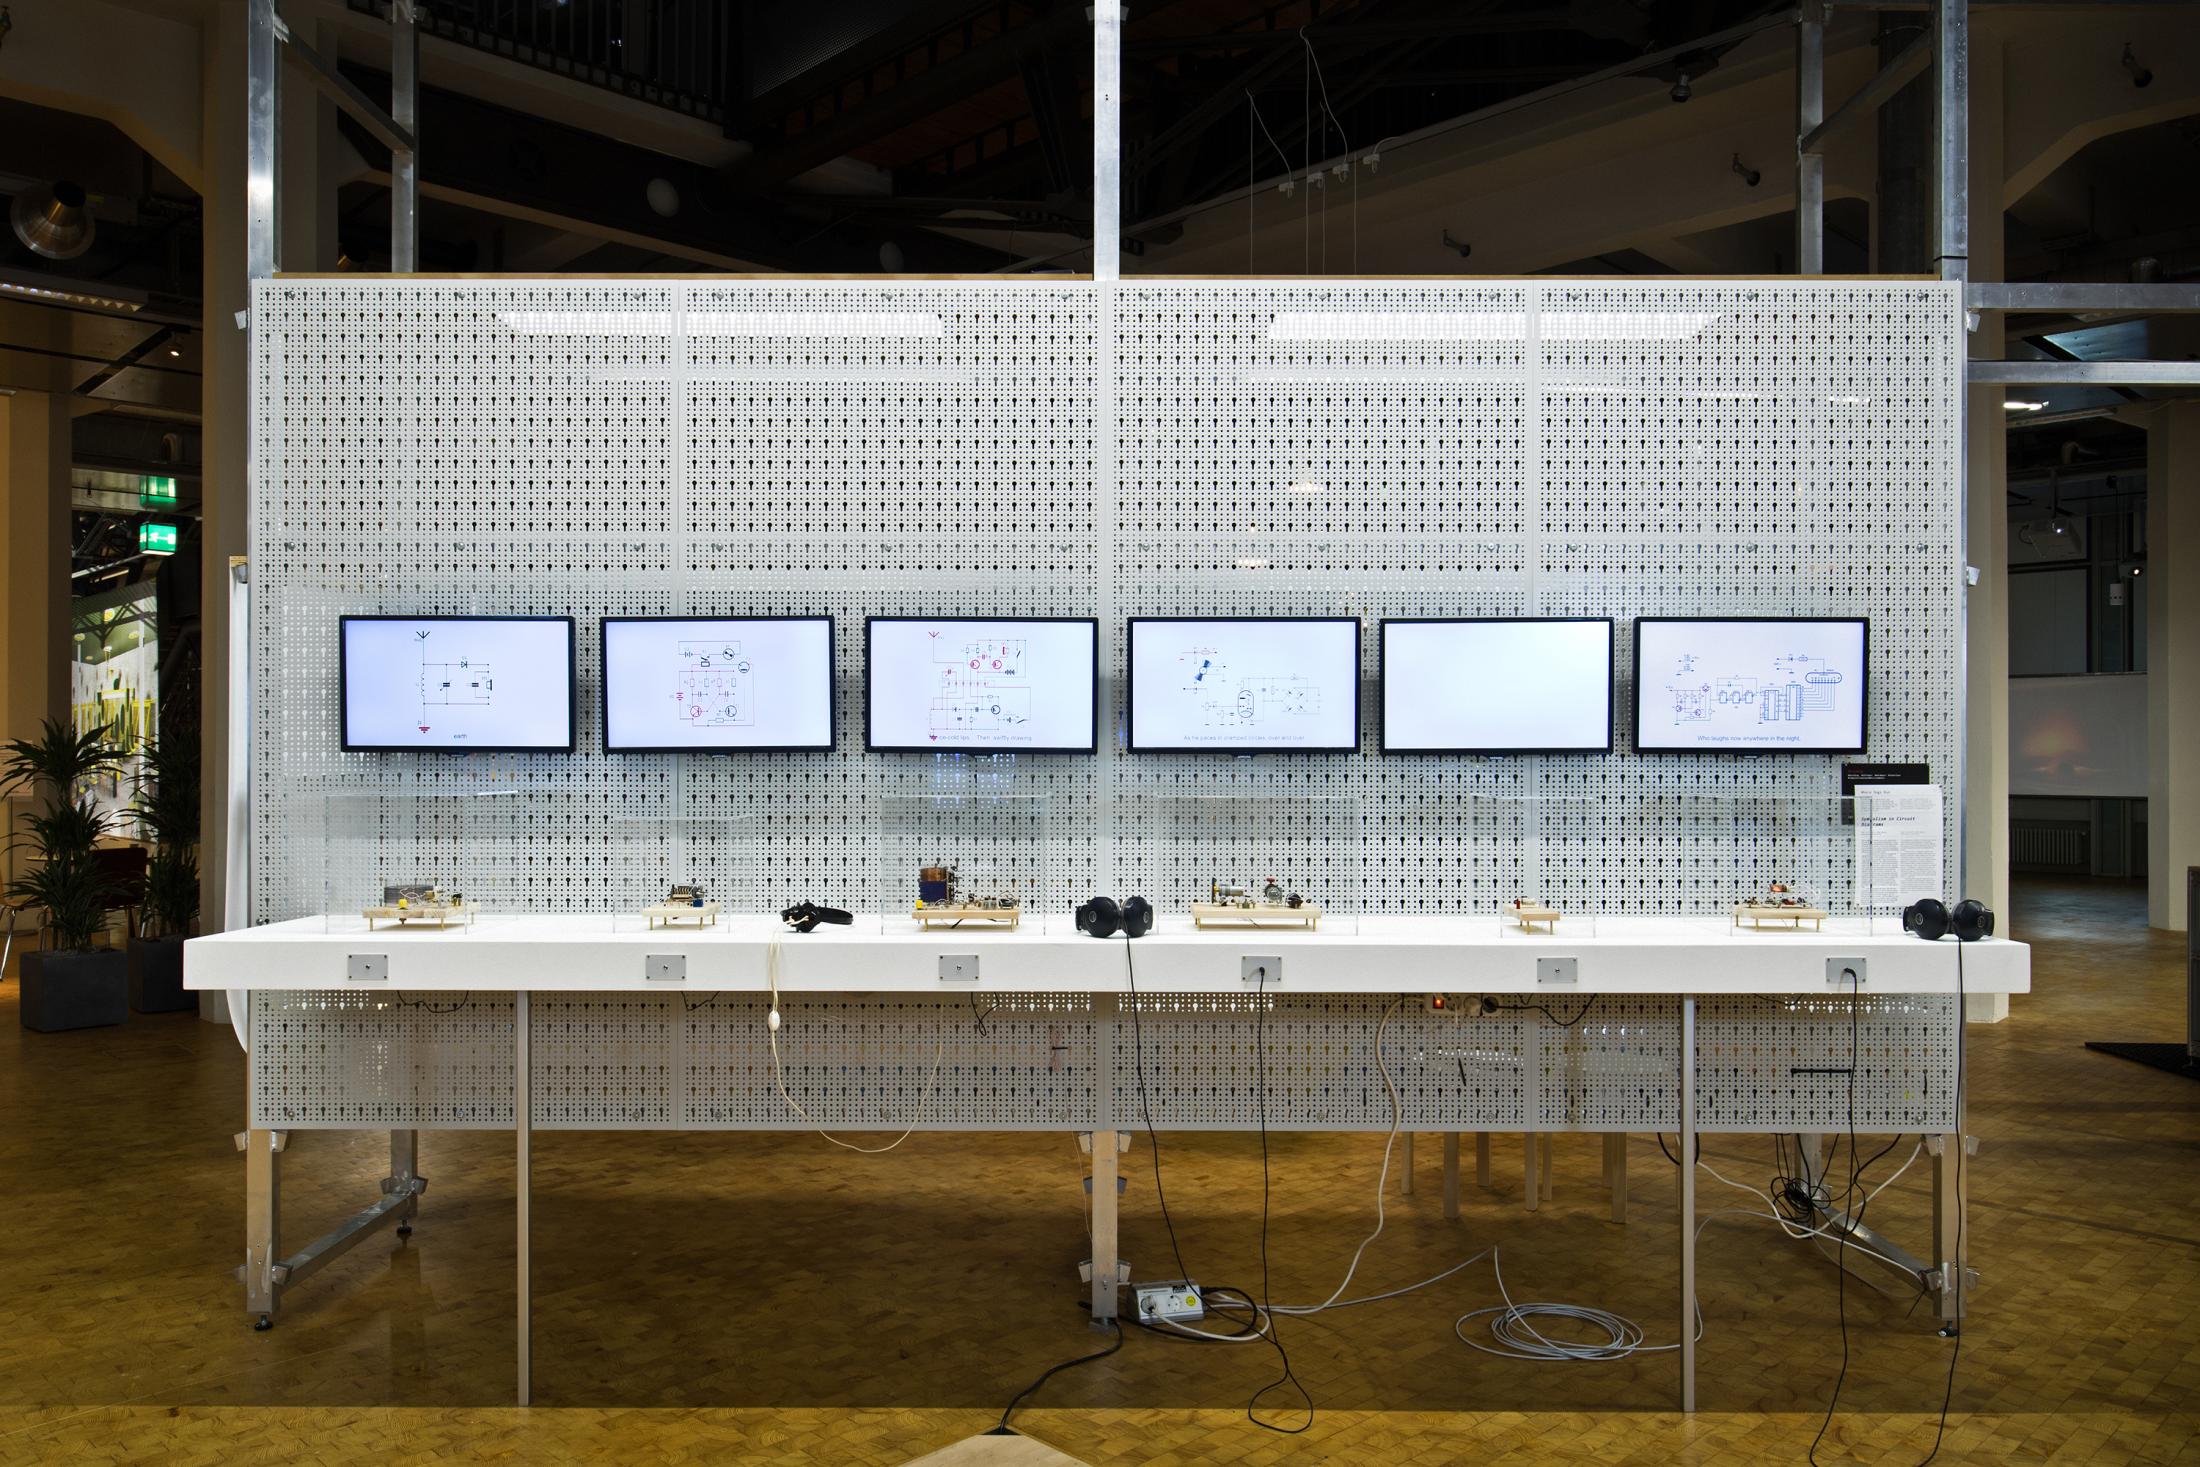 The photo shows six screens on a white grid structure with small objects below and two headphones